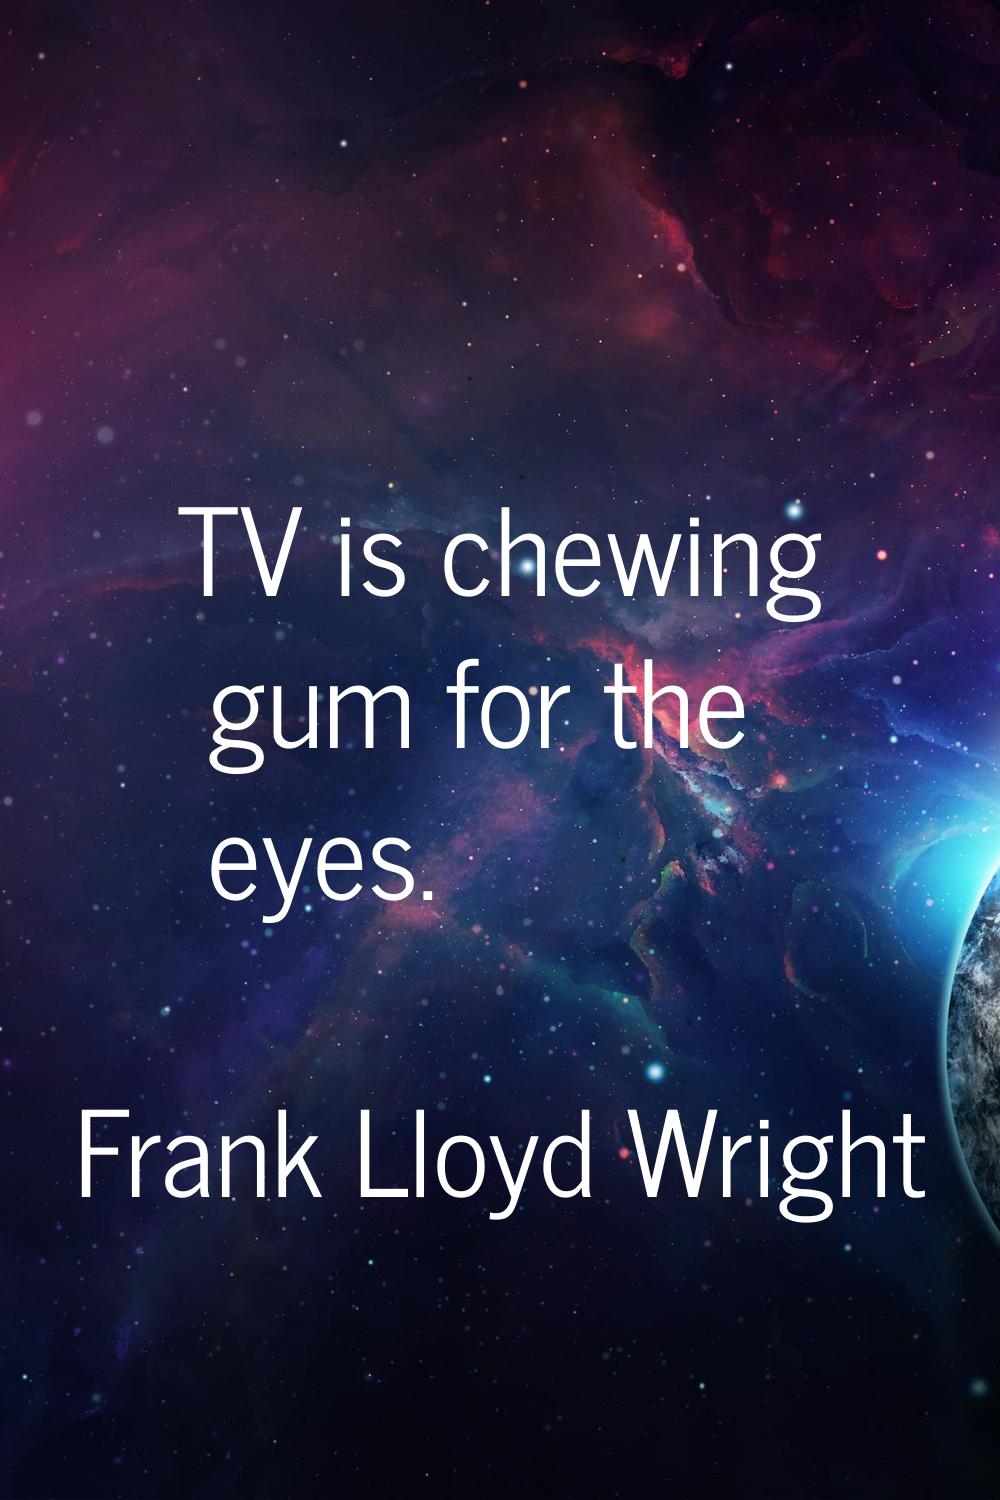 TV is chewing gum for the eyes.